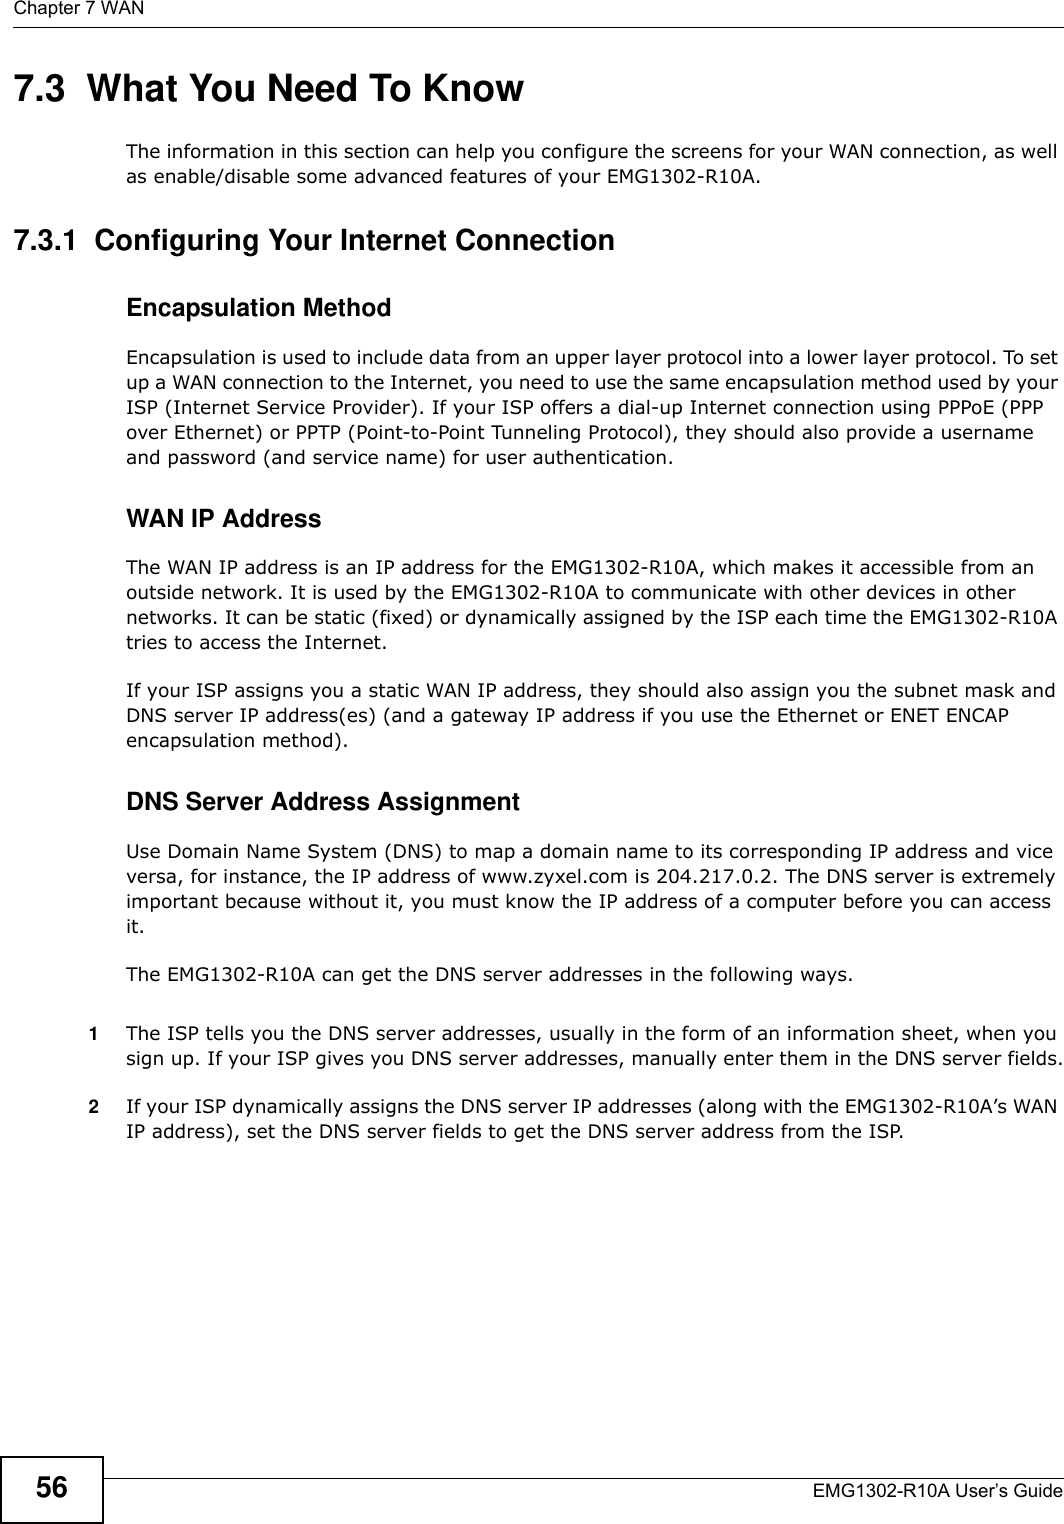 Chapter 7 WANEMG1302-R10A User’s Guide567.3  What You Need To KnowThe information in this section can help you configure the screens for your WAN connection, as well as enable/disable some advanced features of your EMG1302-R10A.7.3.1  Configuring Your Internet ConnectionEncapsulation MethodEncapsulation is used to include data from an upper layer protocol into a lower layer protocol. To set up a WAN connection to the Internet, you need to use the same encapsulation method used by your ISP (Internet Service Provider). If your ISP offers a dial-up Internet connection using PPPoE (PPP over Ethernet) or PPTP (Point-to-Point Tunneling Protocol), they should also provide a username and password (and service name) for user authentication.WAN IP AddressThe WAN IP address is an IP address for the EMG1302-R10A, which makes it accessible from an outside network. It is used by the EMG1302-R10A to communicate with other devices in other networks. It can be static (fixed) or dynamically assigned by the ISP each time the EMG1302-R10A tries to access the Internet.If your ISP assigns you a static WAN IP address, they should also assign you the subnet mask and DNS server IP address(es) (and a gateway IP address if you use the Ethernet or ENET ENCAP encapsulation method).DNS Server Address AssignmentUse Domain Name System (DNS) to map a domain name to its corresponding IP address and vice versa, for instance, the IP address of www.zyxel.com is 204.217.0.2. The DNS server is extremely important because without it, you must know the IP address of a computer before you can access it.The EMG1302-R10A can get the DNS server addresses in the following ways.1The ISP tells you the DNS server addresses, usually in the form of an information sheet, when you sign up. If your ISP gives you DNS server addresses, manually enter them in the DNS server fields.2If your ISP dynamically assigns the DNS server IP addresses (along with the EMG1302-R10A’s WAN IP address), set the DNS server fields to get the DNS server address from the ISP. 